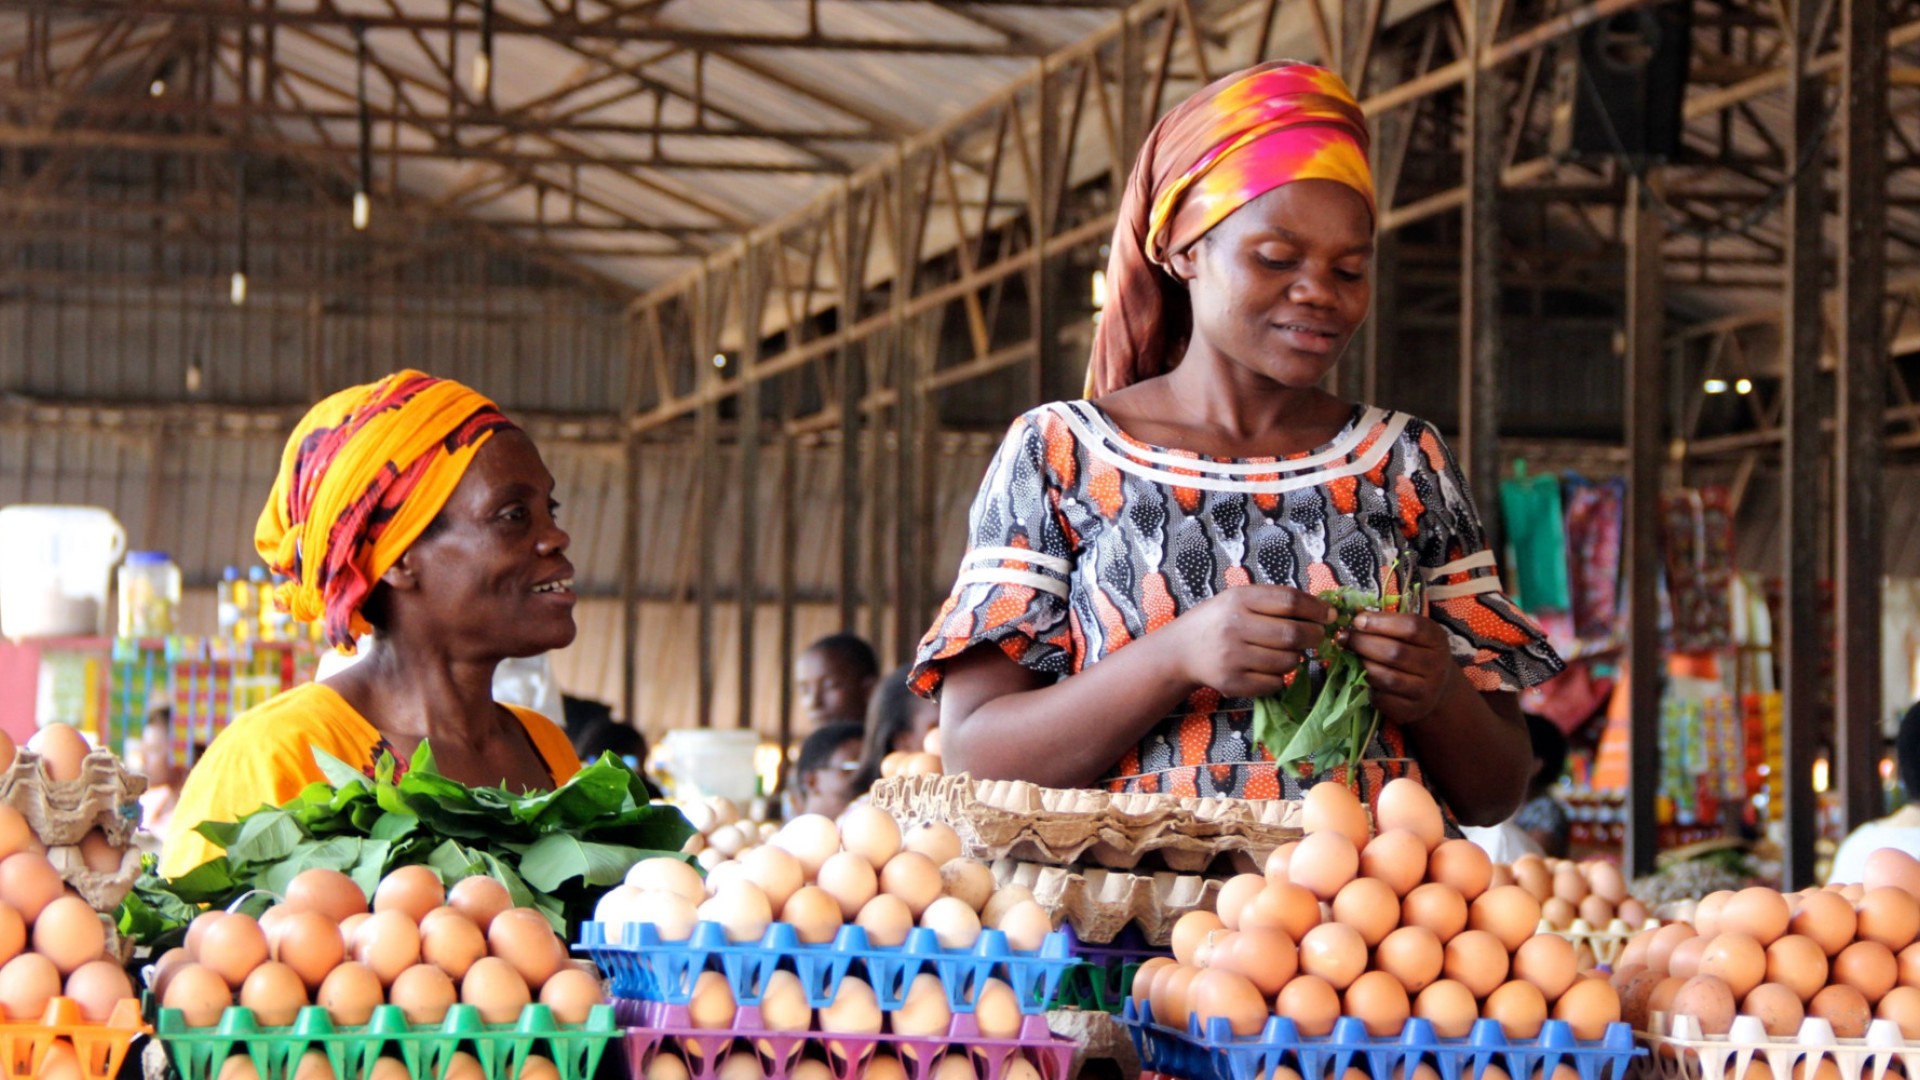 Two woman wearing head wraps and stacking eggs at the Kigali Market in Rwanda